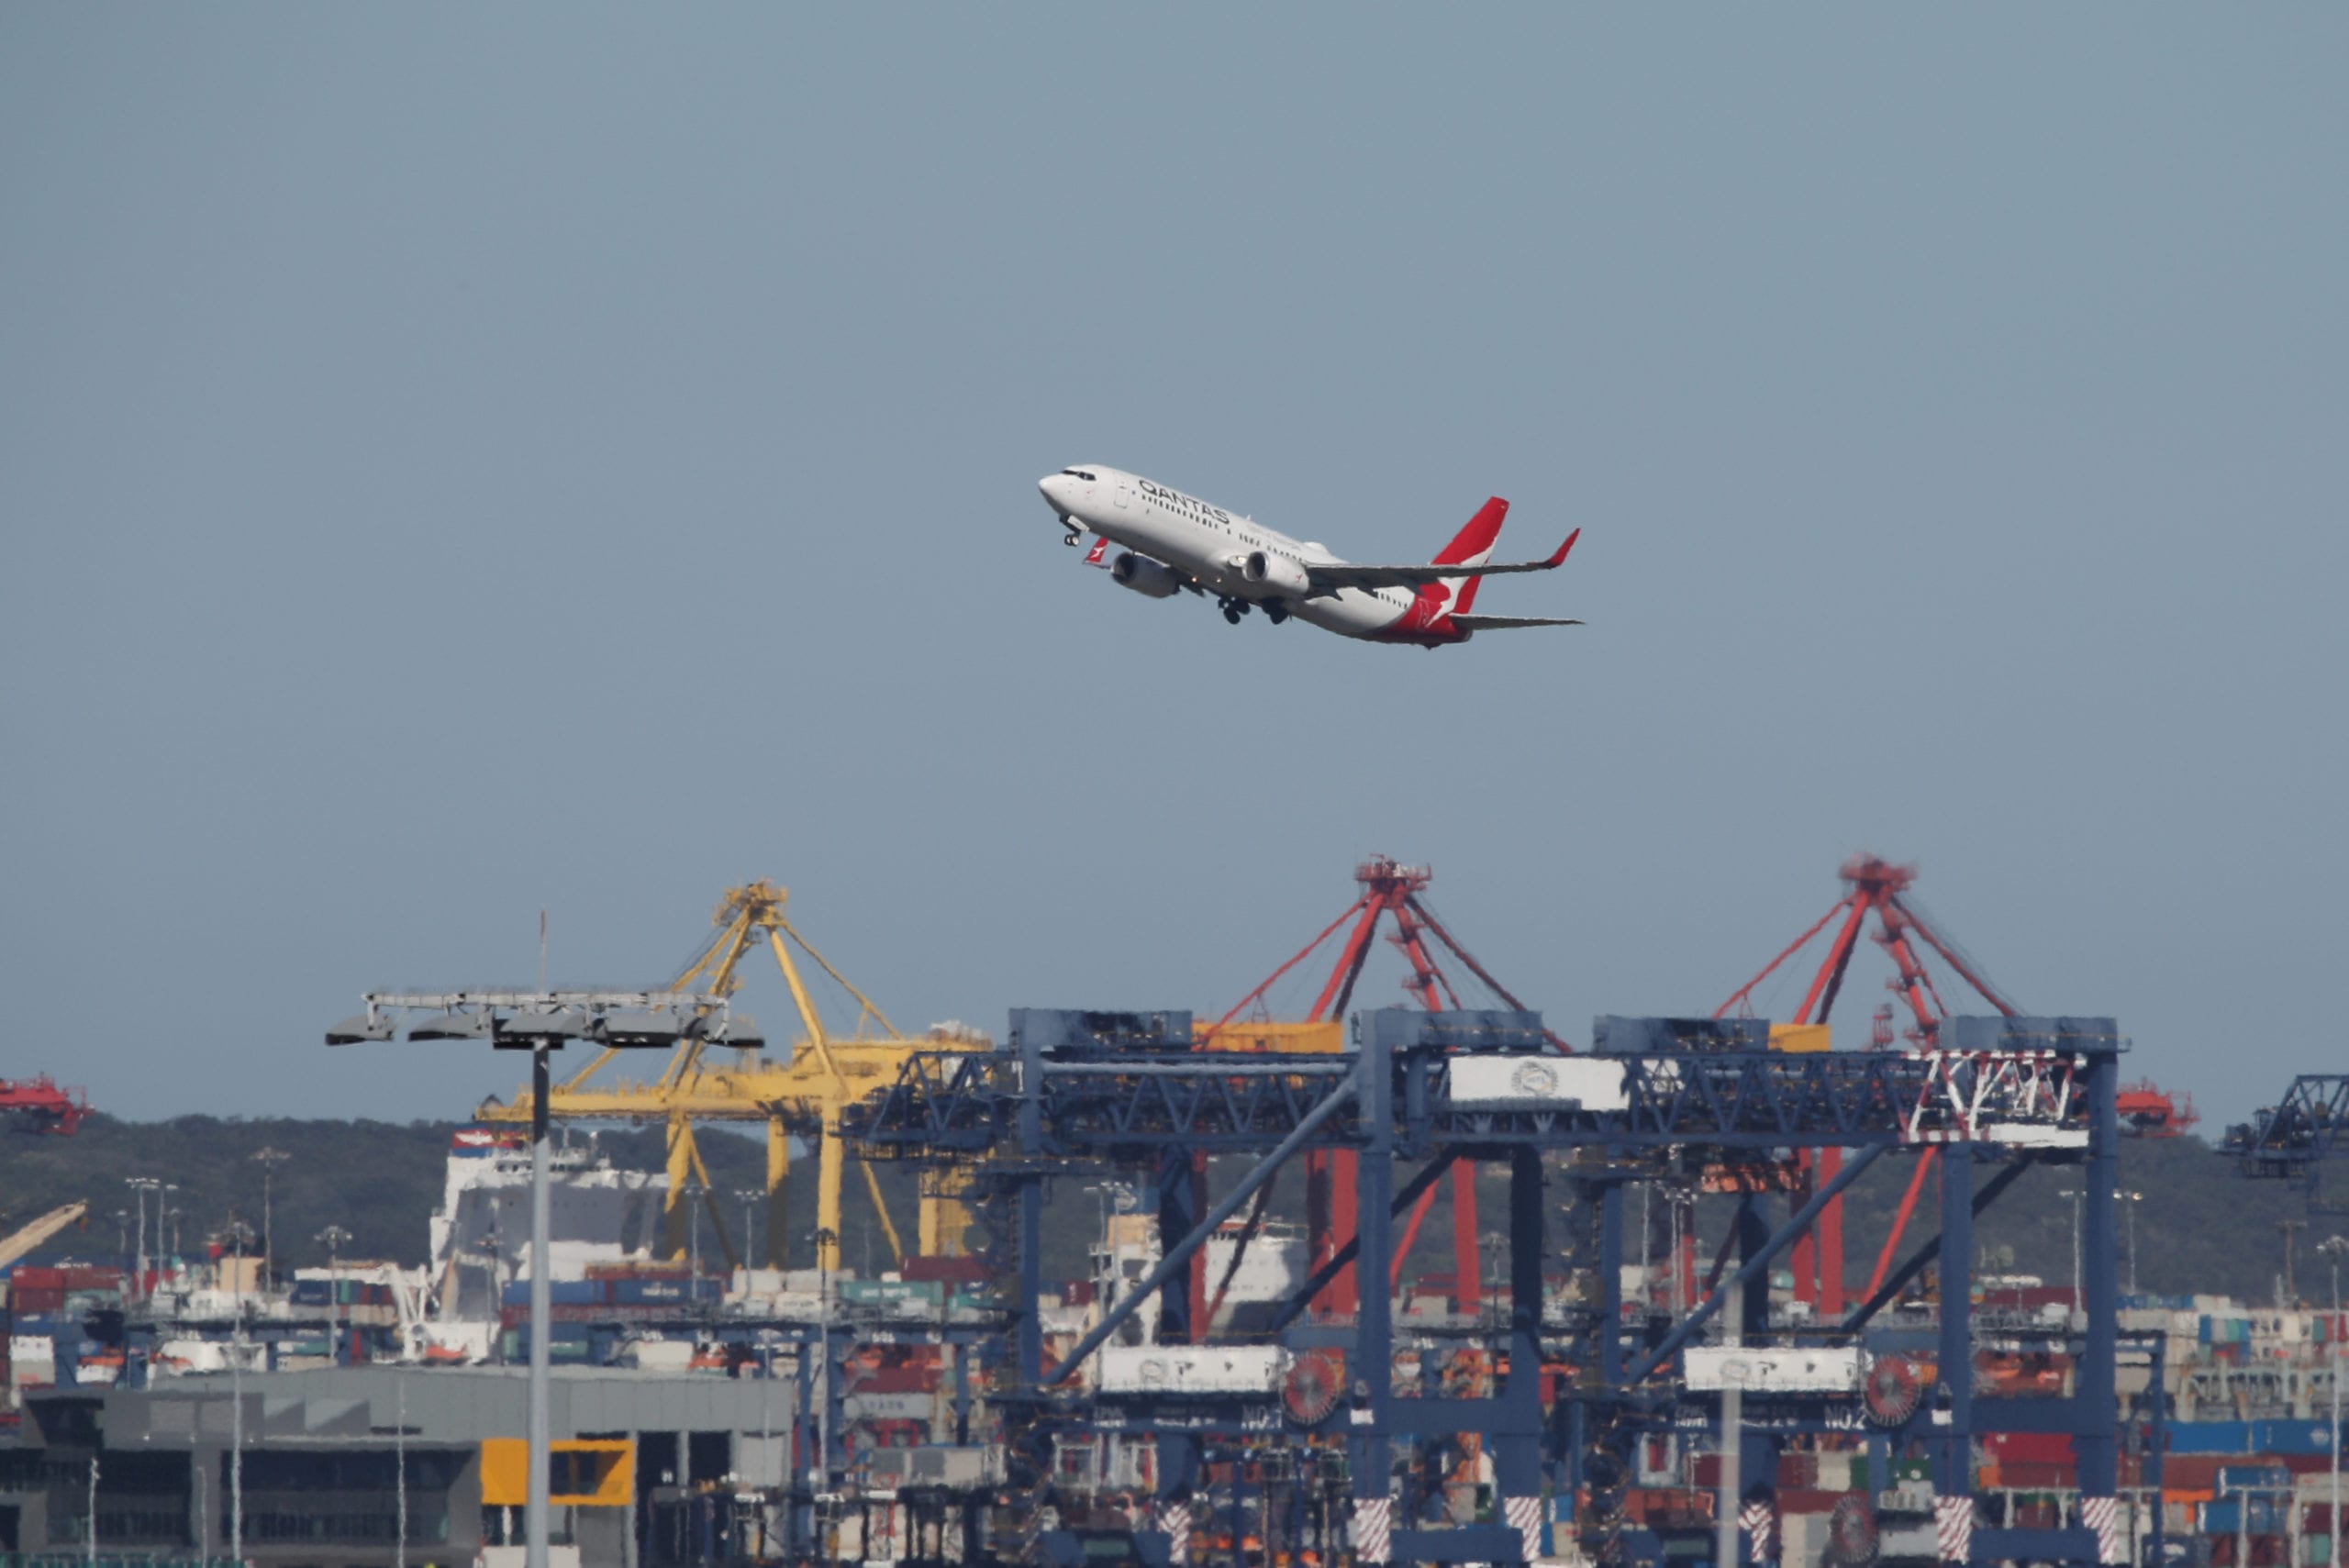 Qantas flight mayday: can a plane normally fly on just one engine? An aviation expert explains